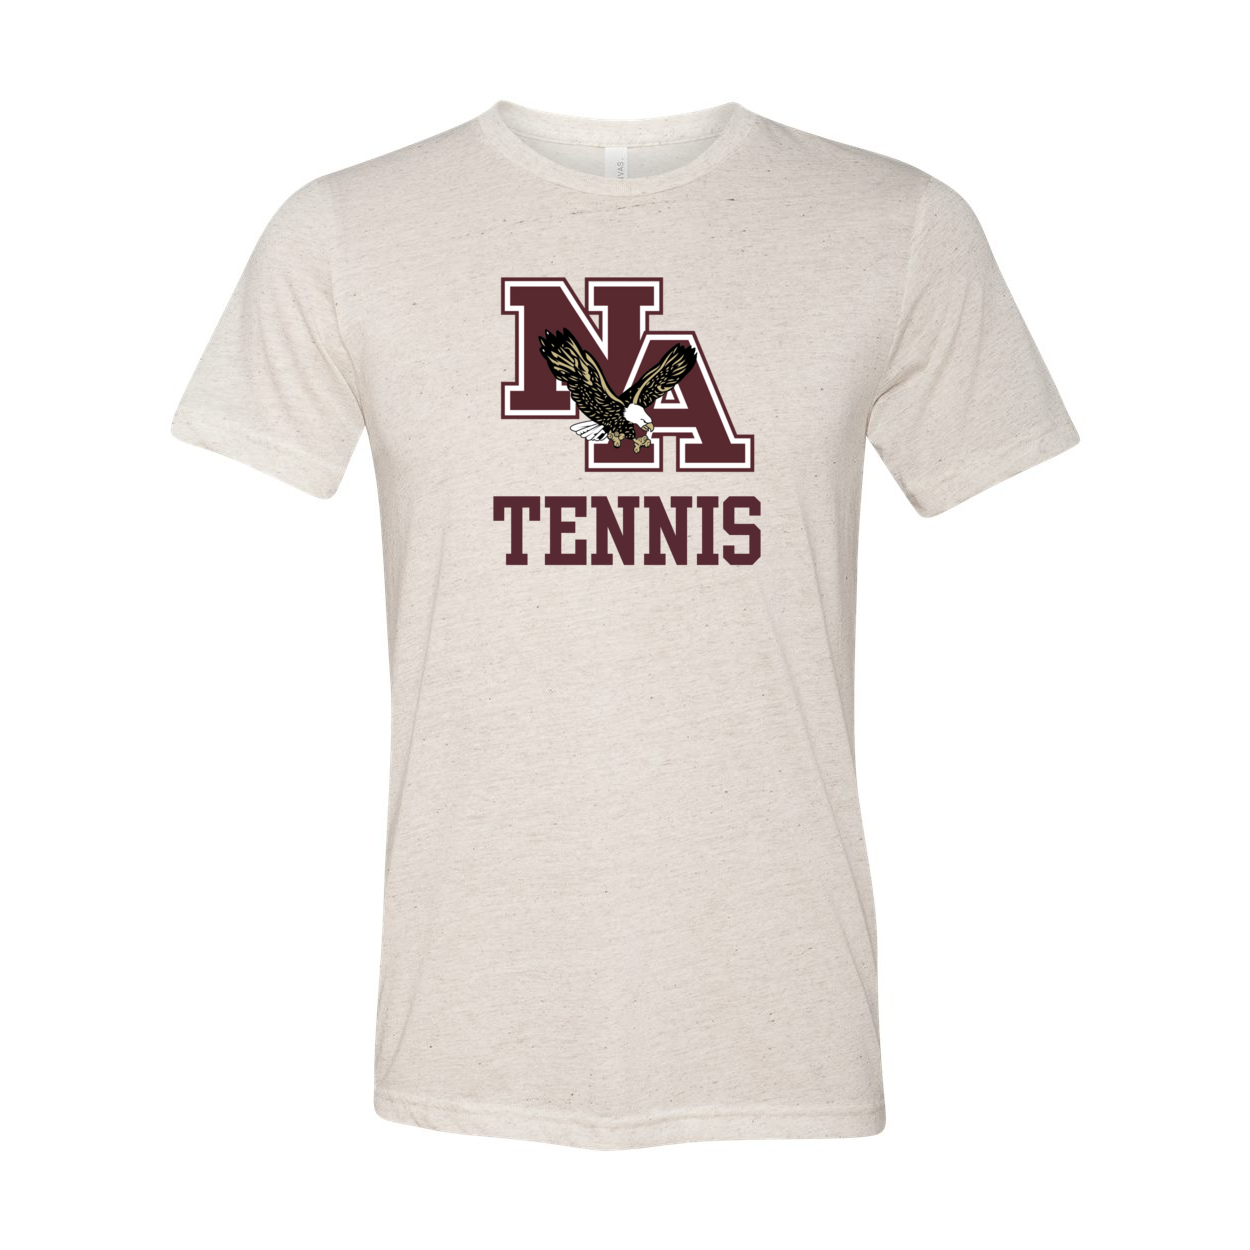 Adult Unisex Super Soft Tennis Classic Logo Short Sleeve Graphic Tee - New Albany Eagles